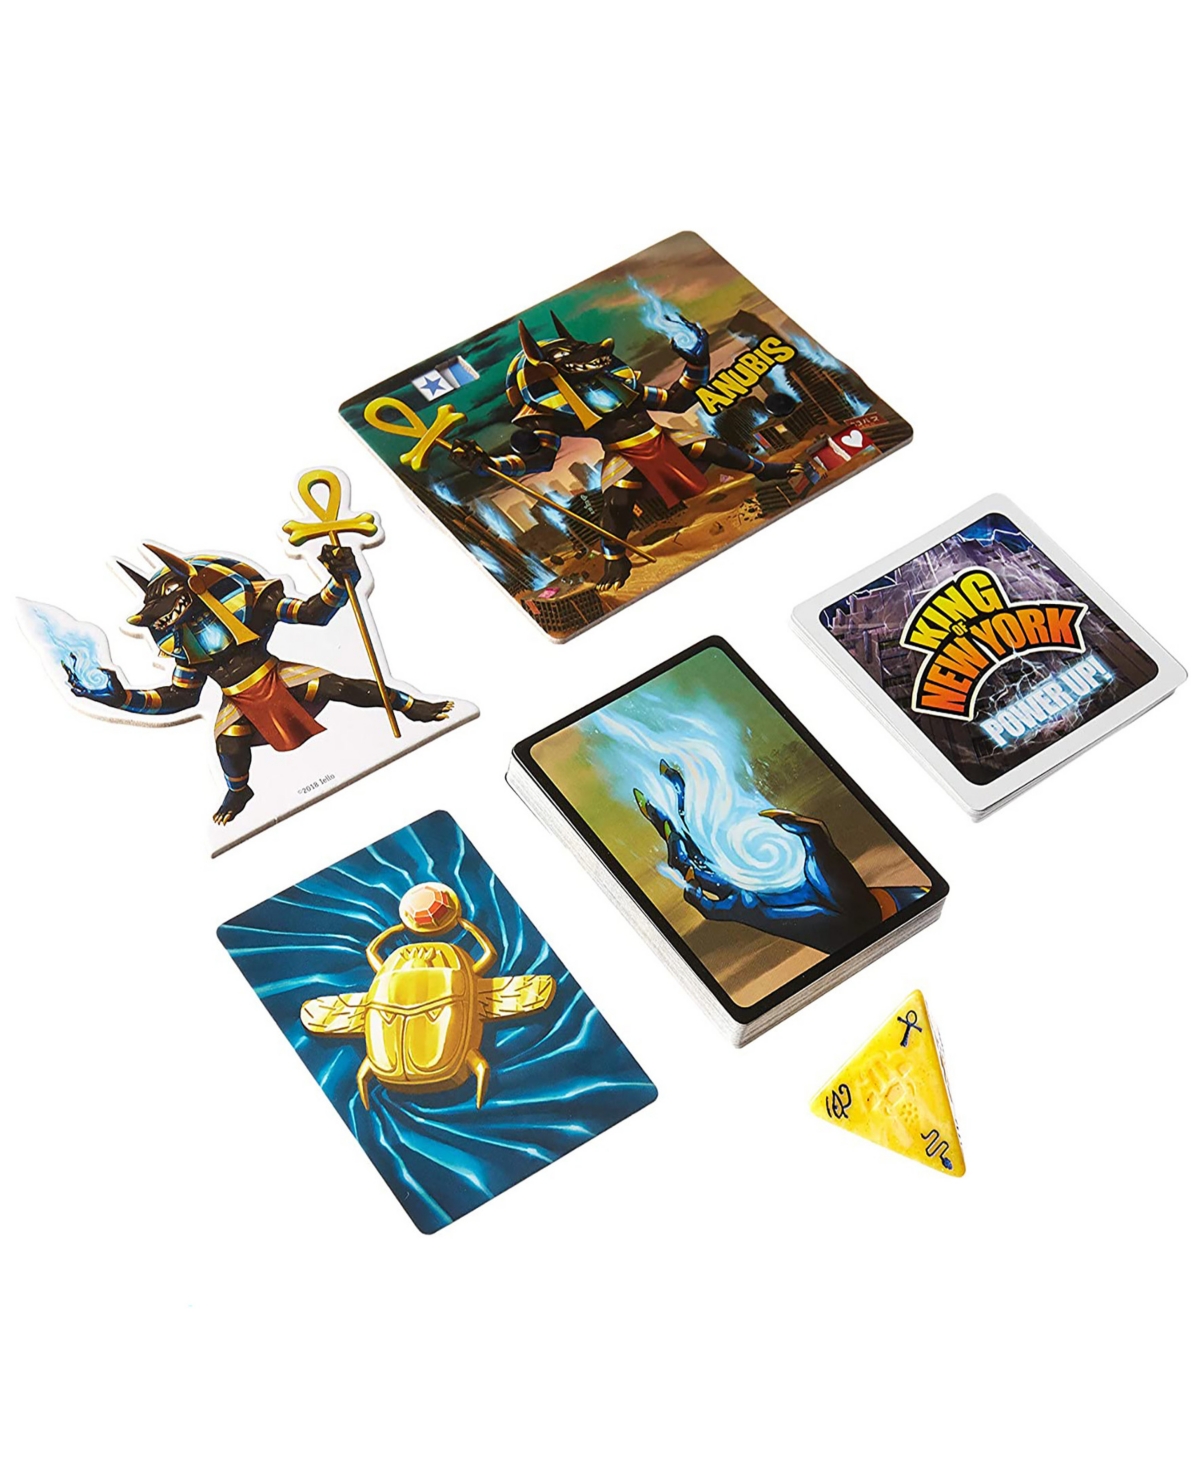 Shop Iello King Of Tokyo Monster 3rd Anubis Expansion Pack In Multi